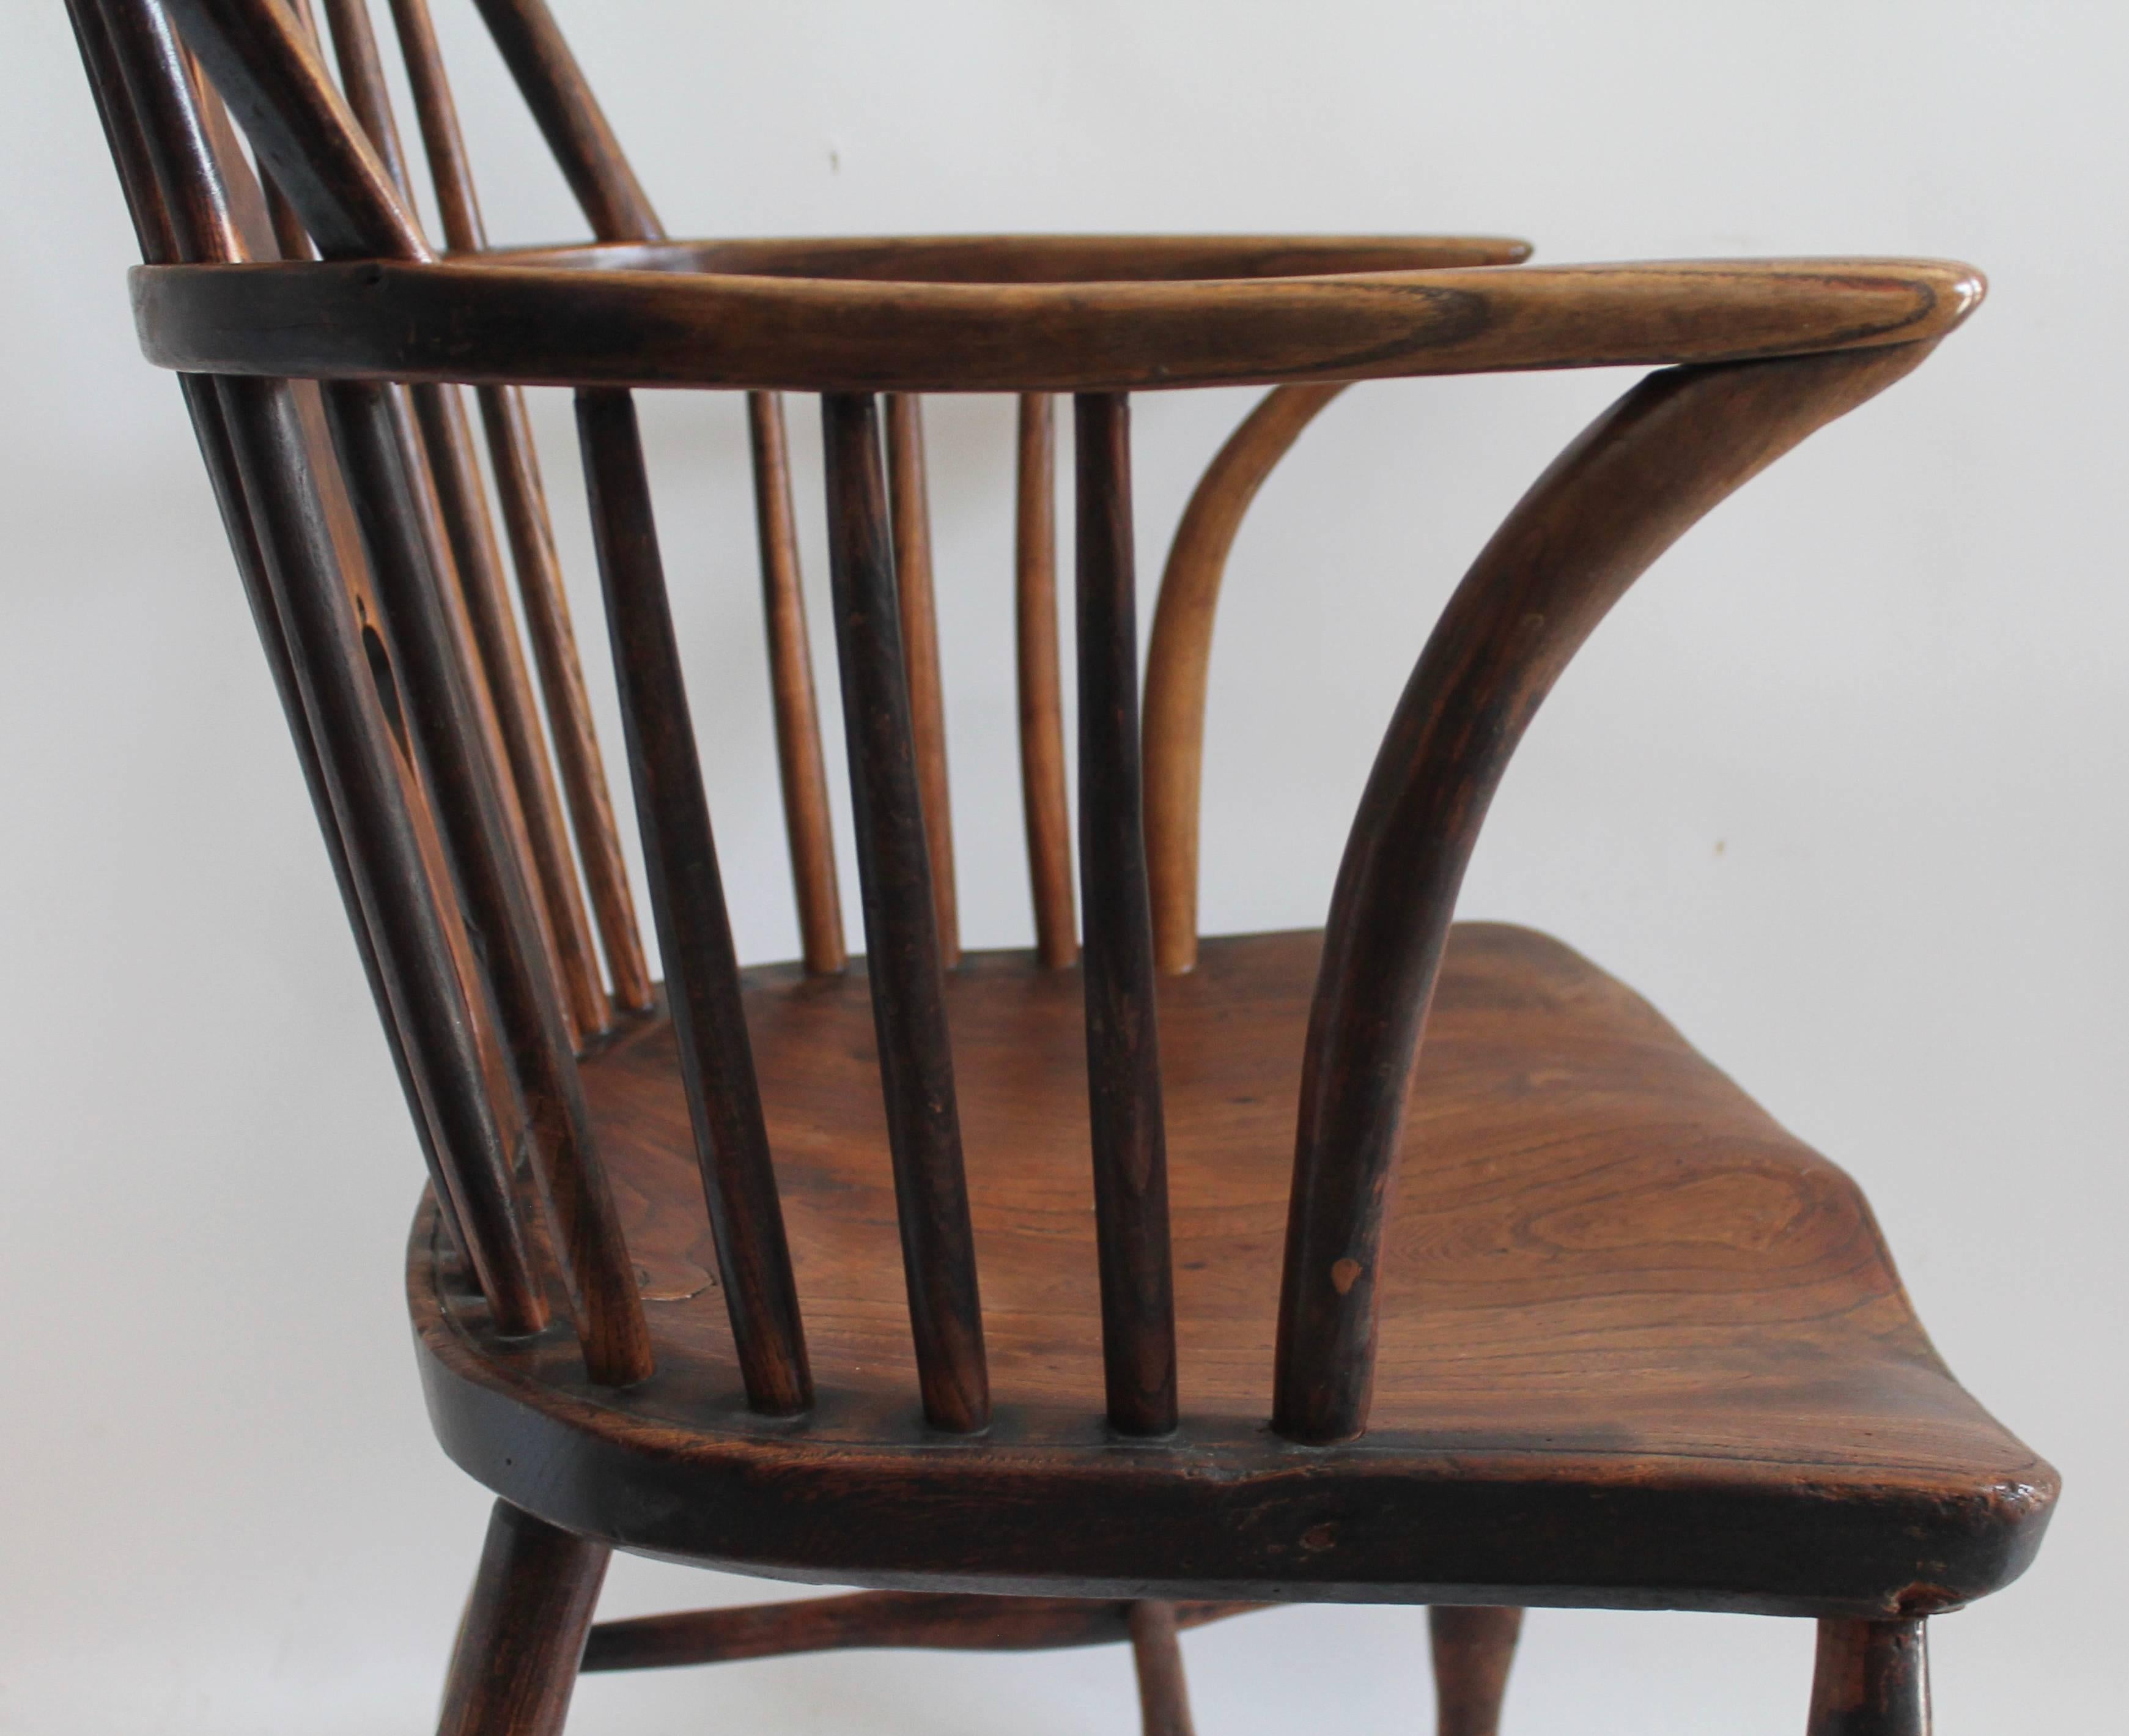 Hickory Early 19th Century English Windsor Chair with Star Back Splash